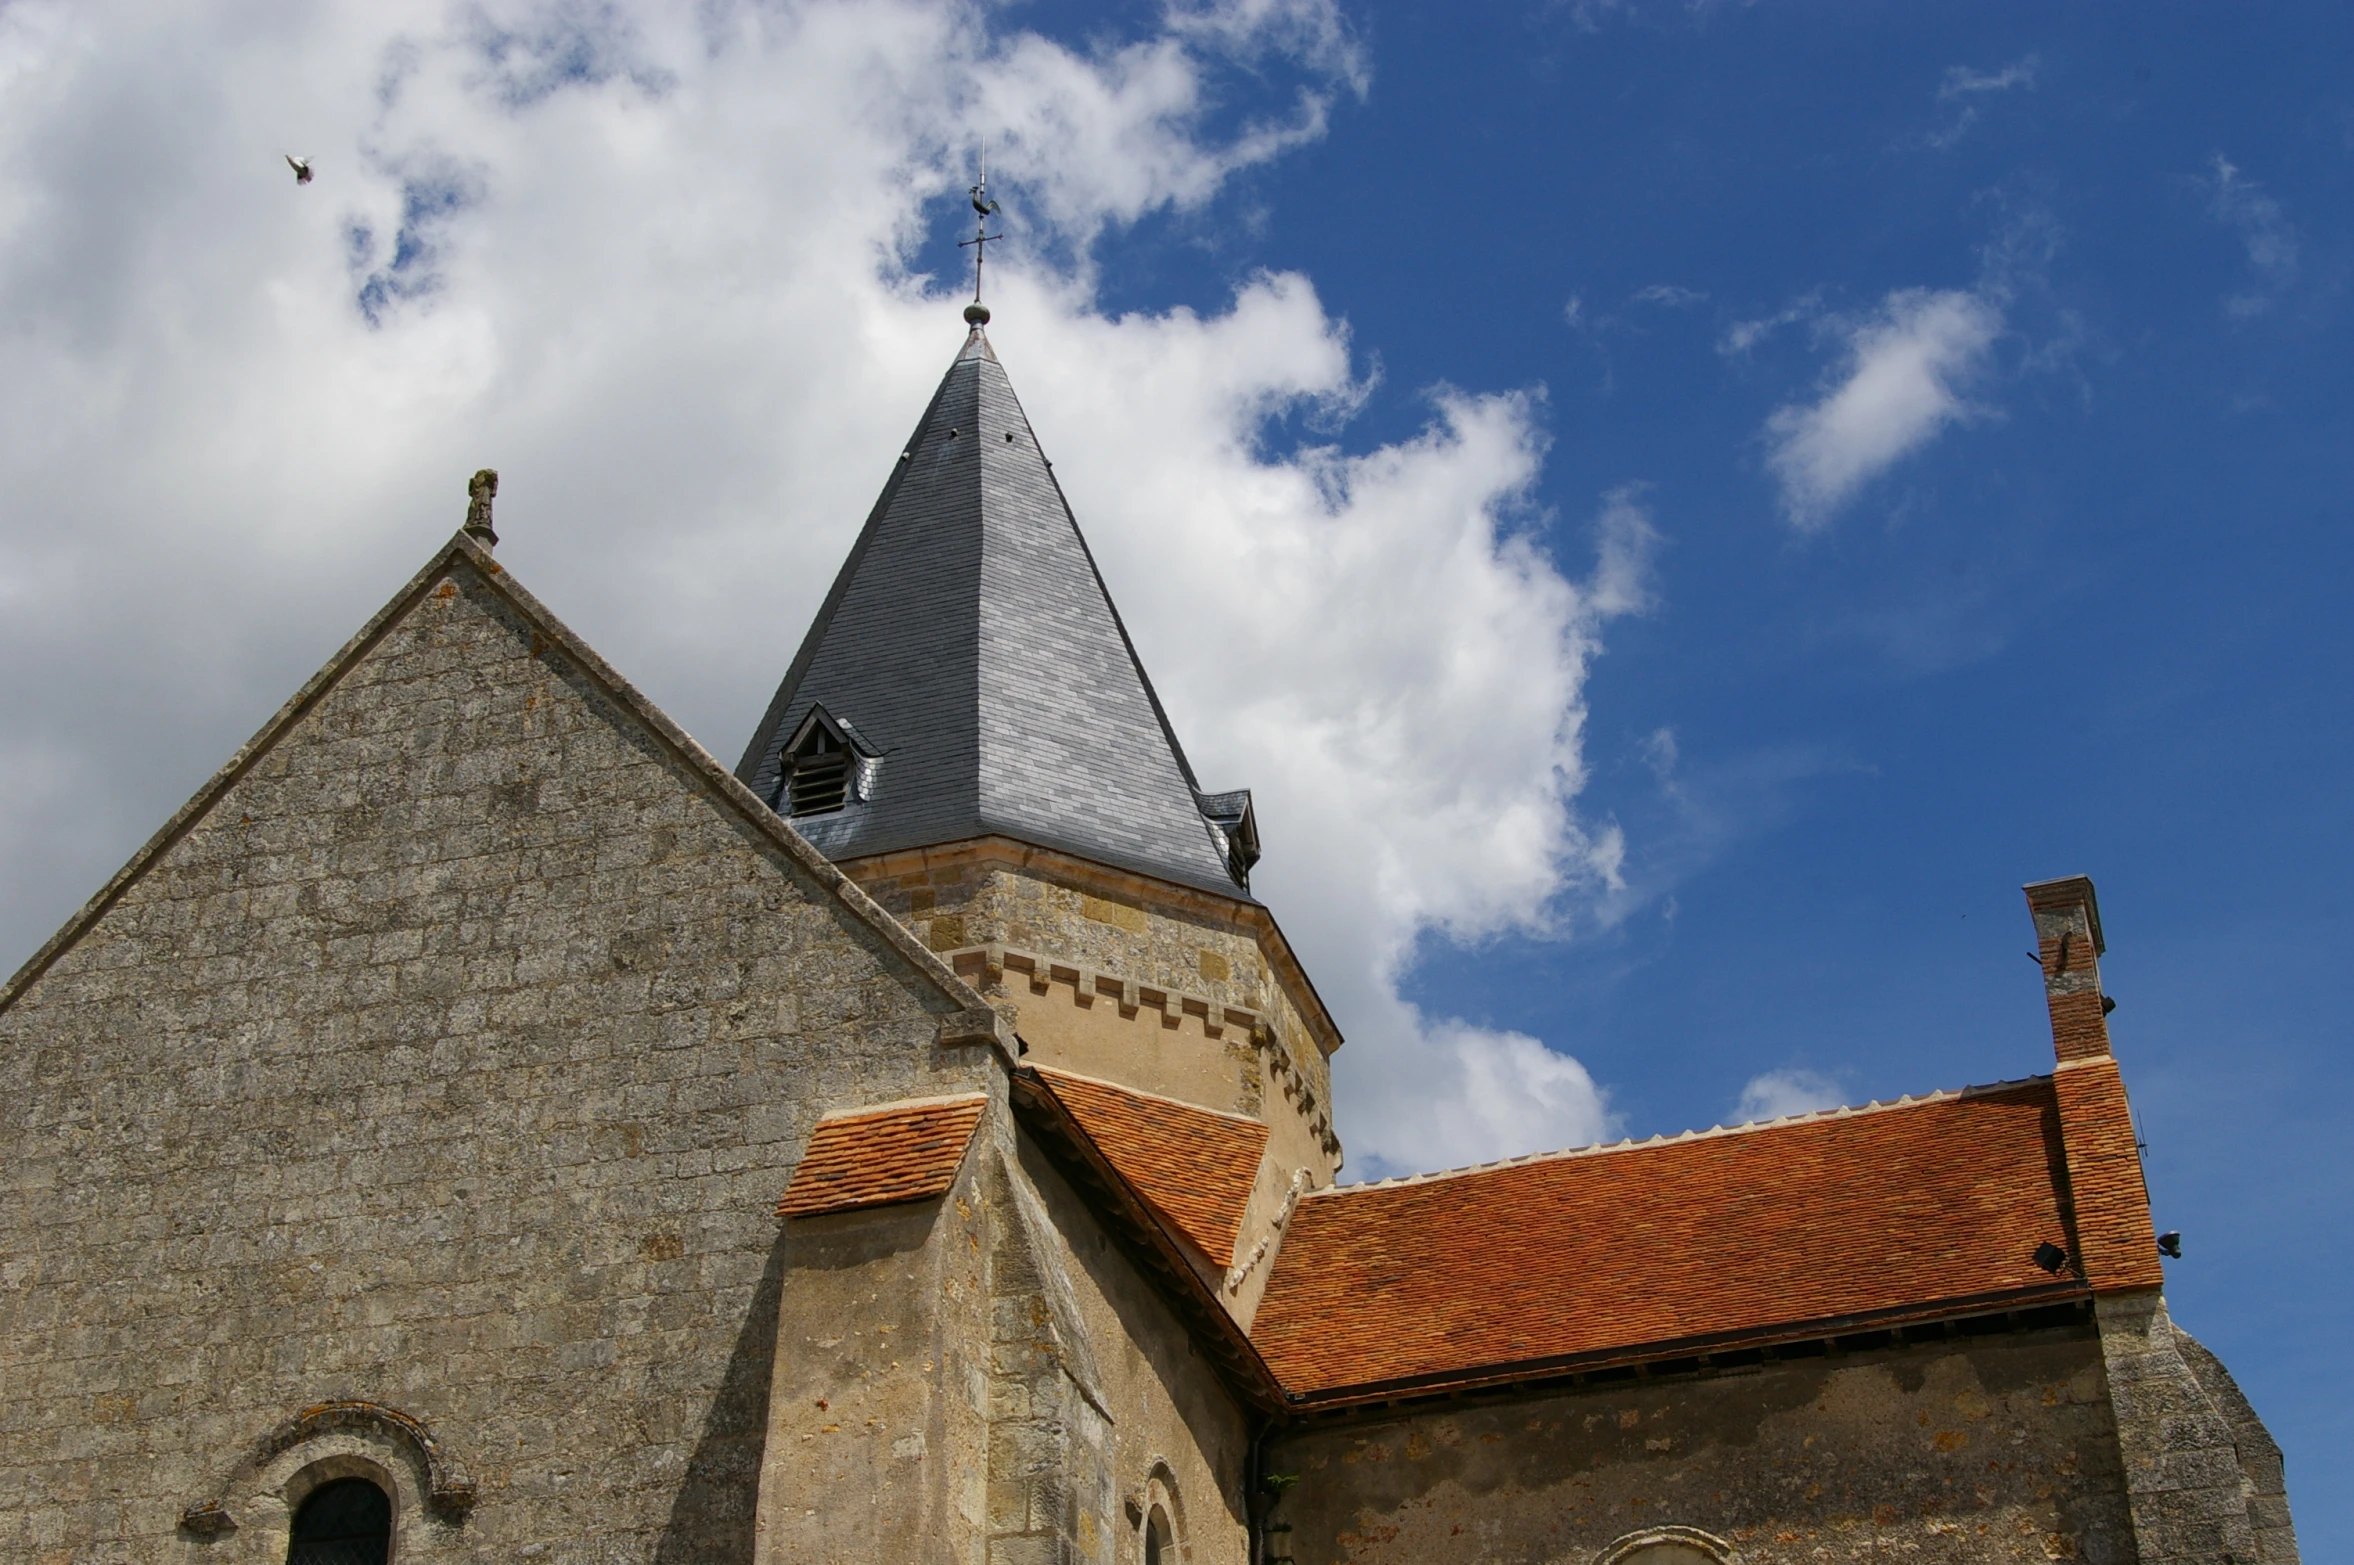 a church with a tower and orange tile roof